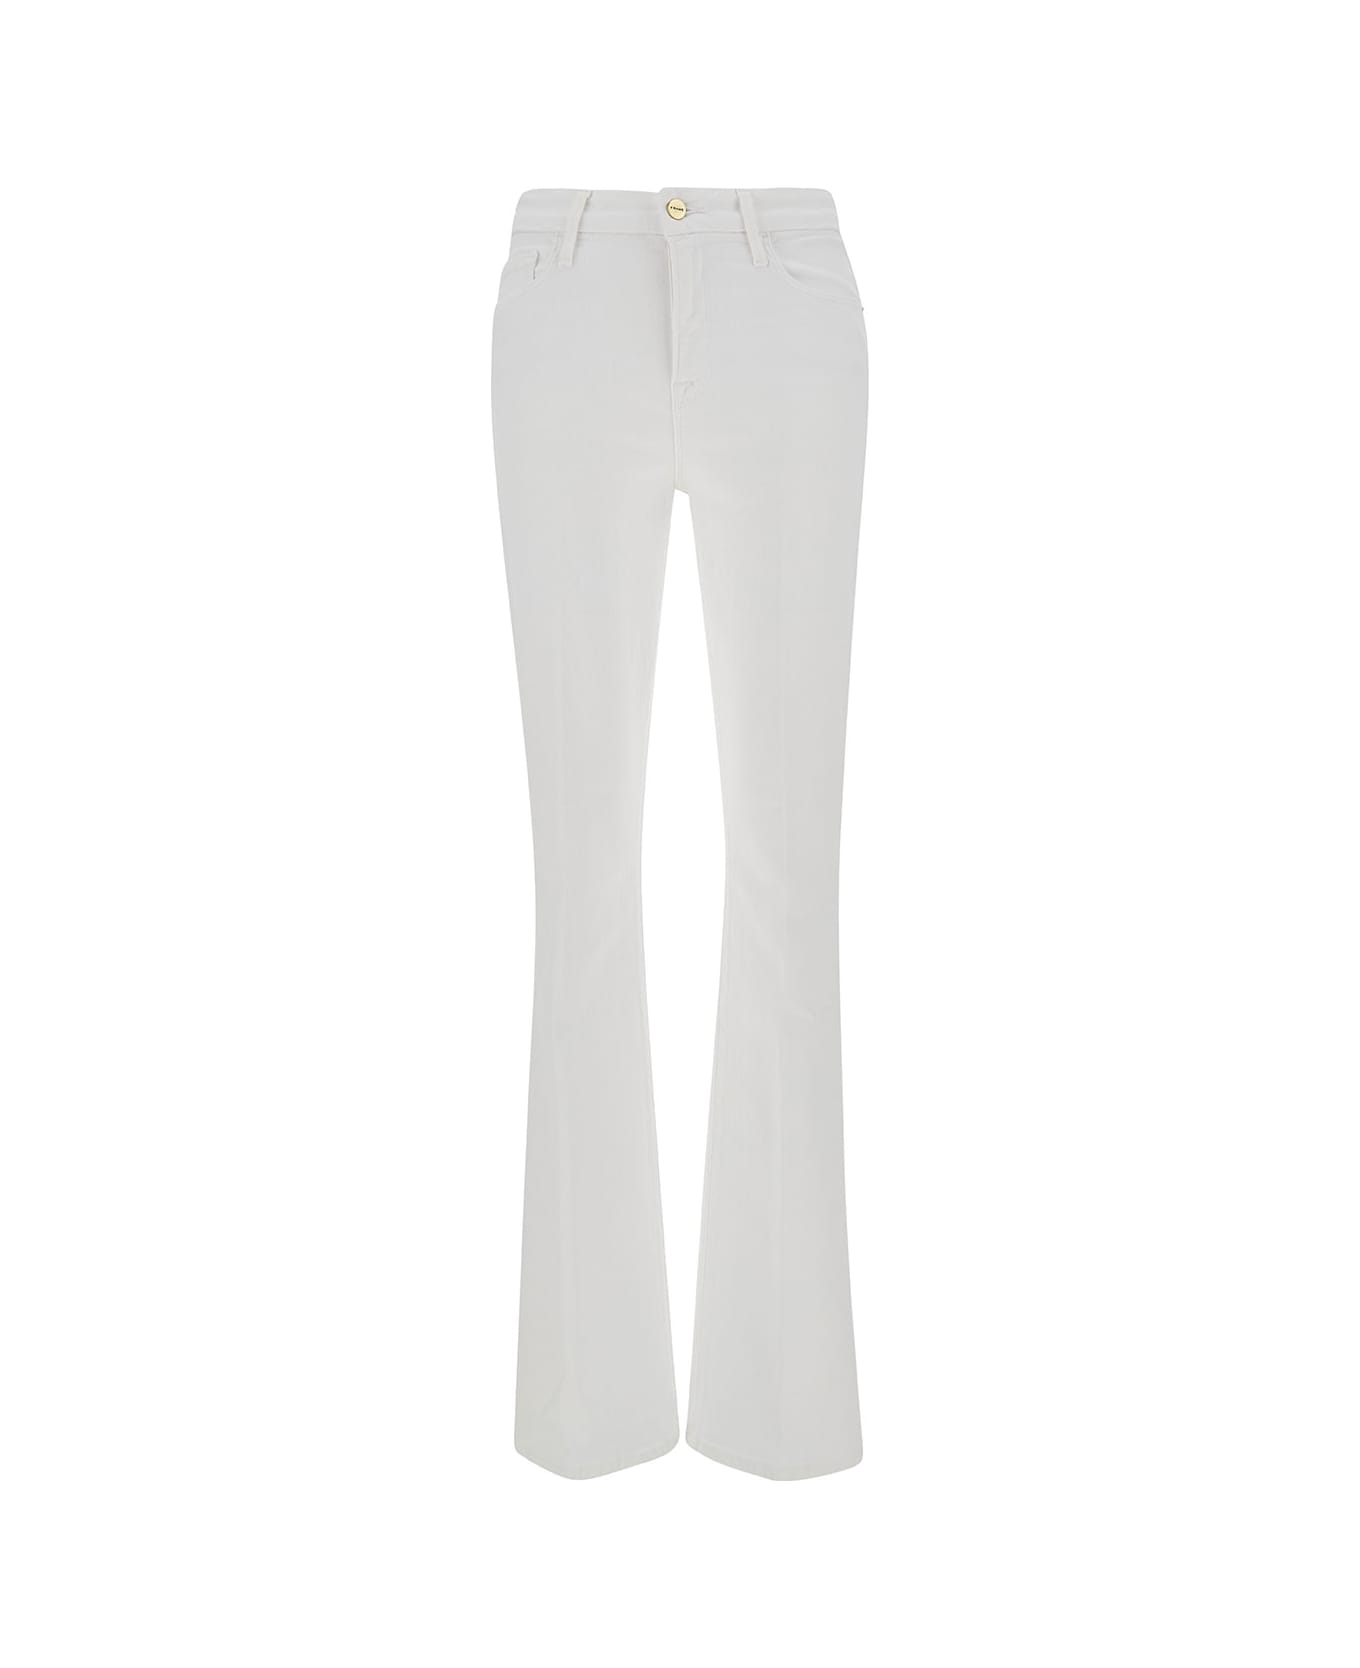 Frame 'mini Boot' White Flared Jeans With Branded Button In Cotton Blend Denim Woman - White